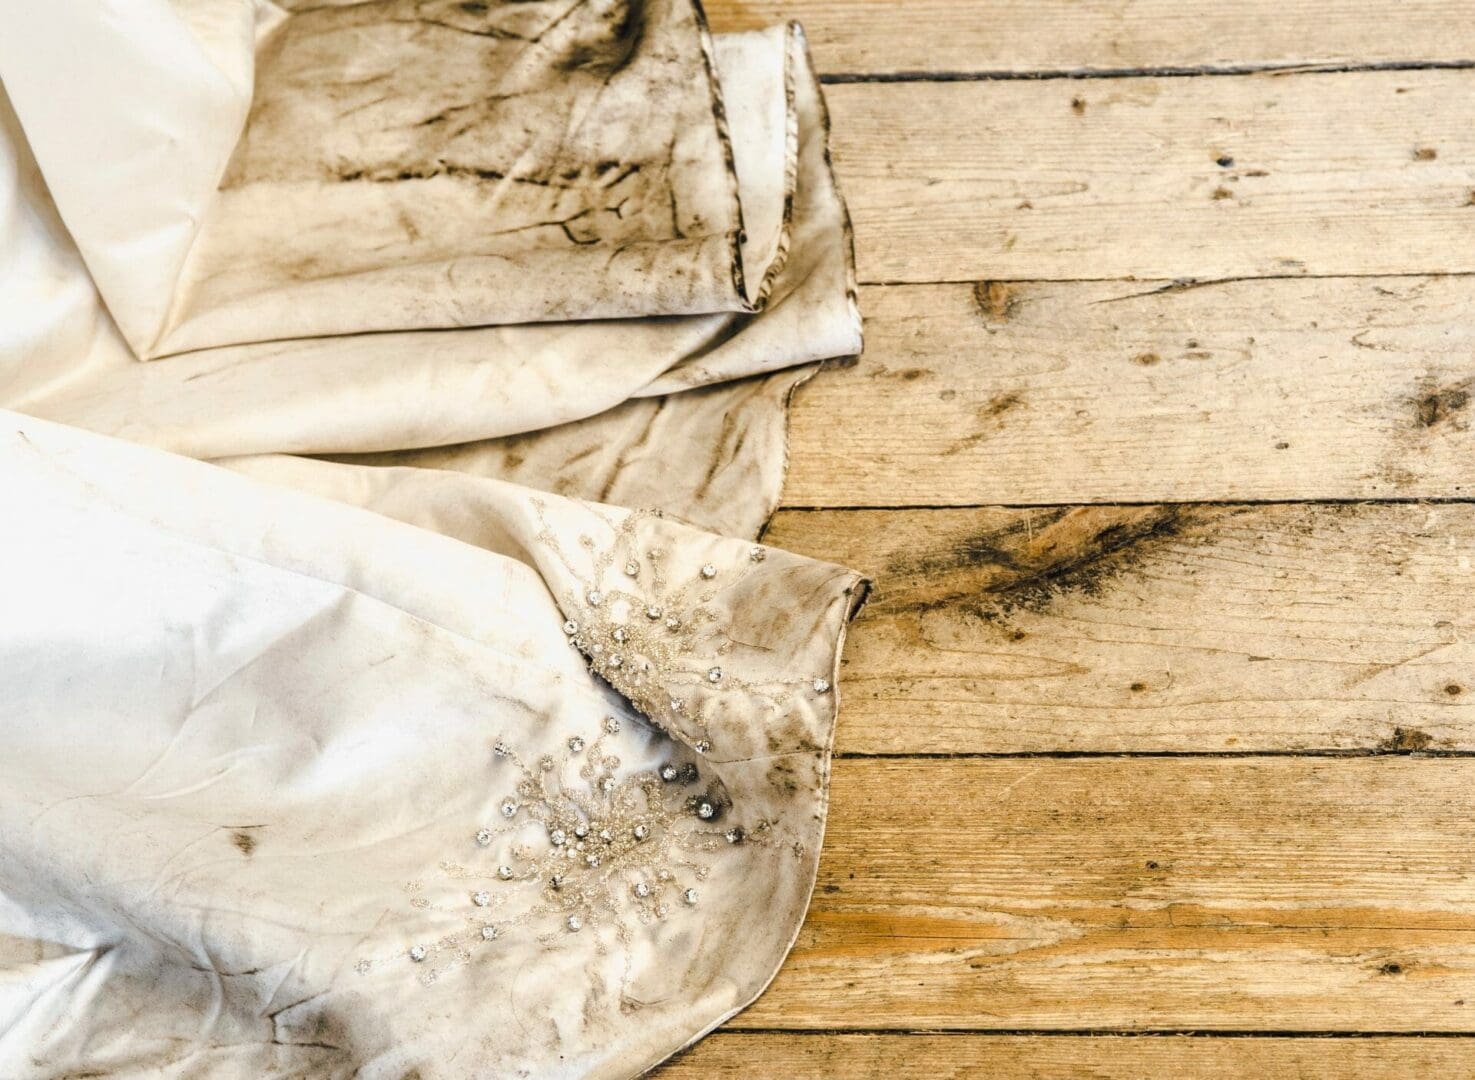 A white sheet on a wooden floor.